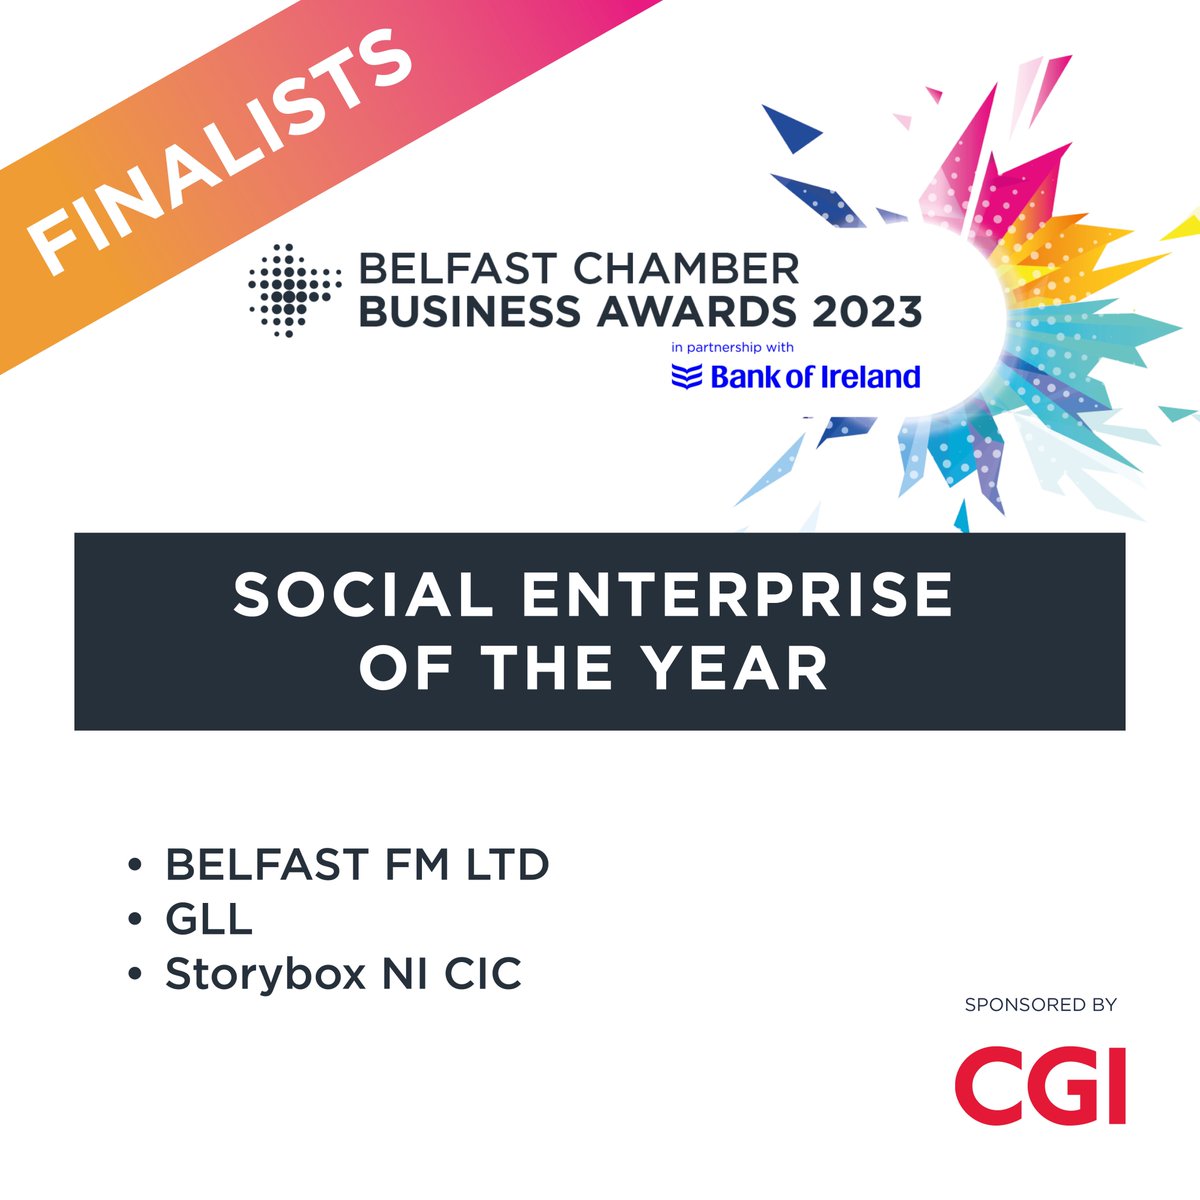 ✅ Sponsored by @CGI_UKNEWS our final category for today is 'SOCIAL ENTERPRISE OF THE YEAR'. Our finalists are: 
• BELFAST FM LTD 
• GLL 
• Storybox NI CIC 
✅ Congratulations to all! #belfastchamber #belfast #belfastchamberbusinessawards #businessgrowth